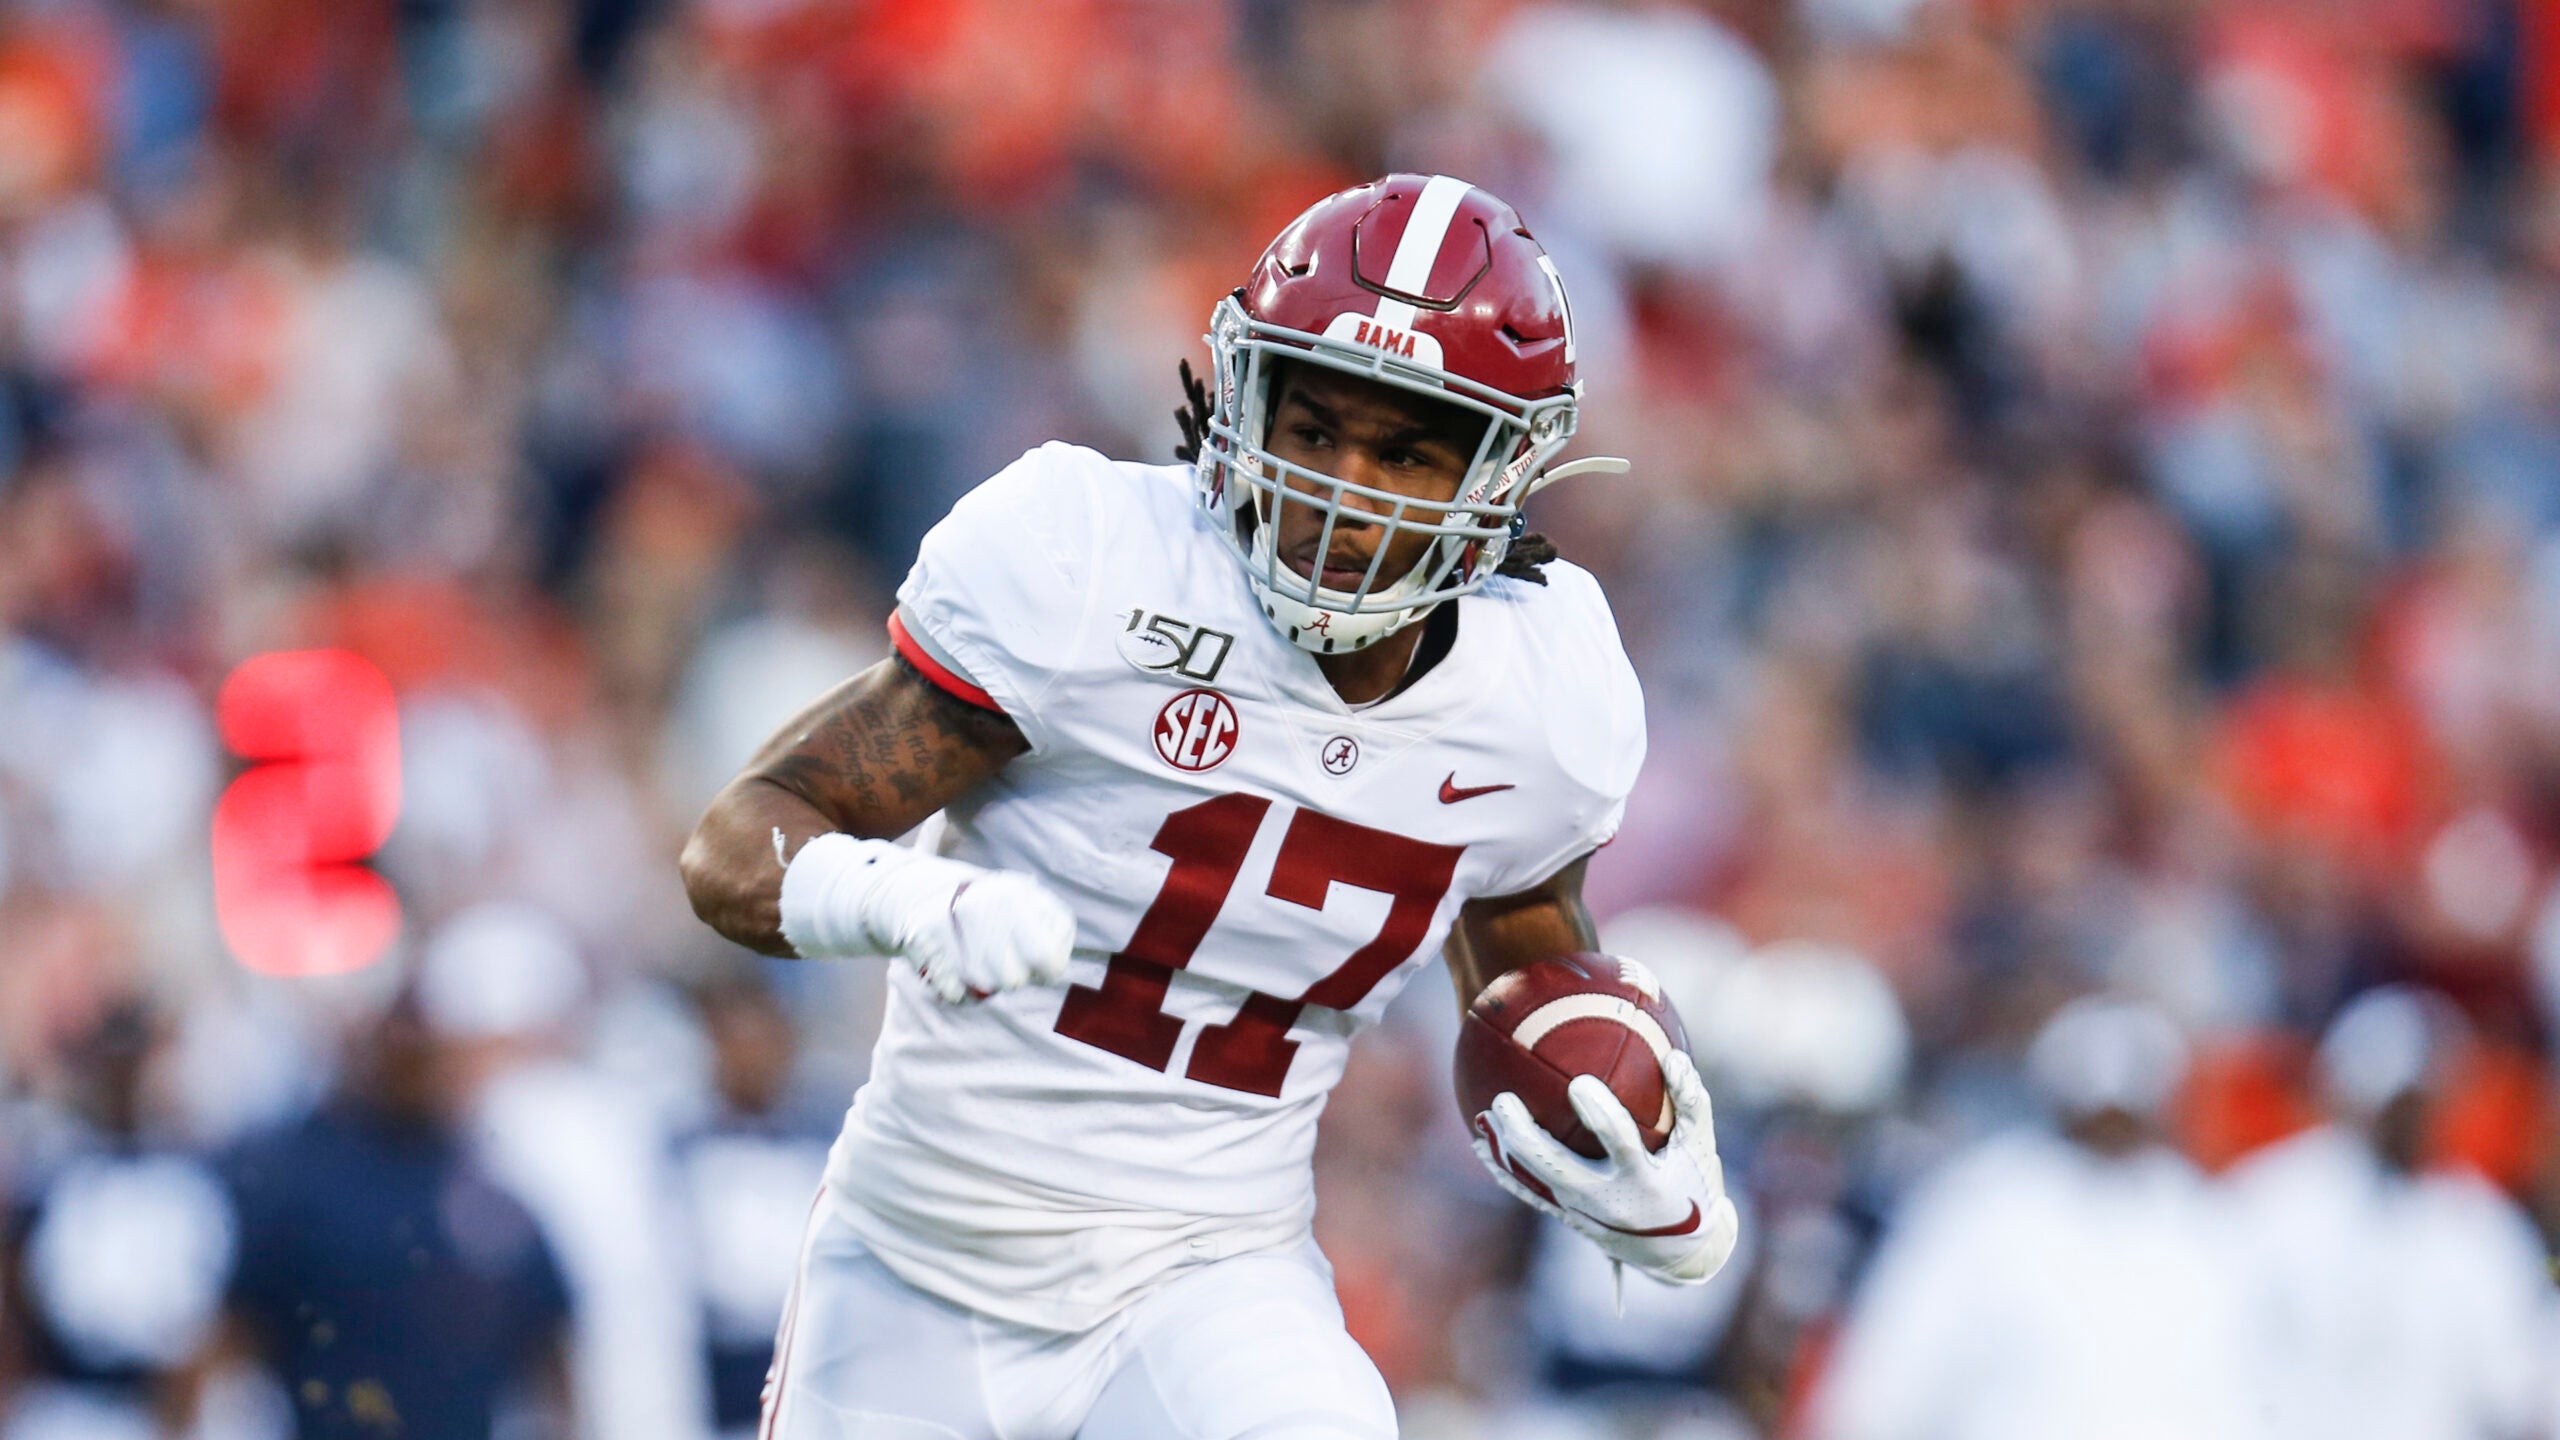 Jaylen Waddle is set to run the 40-yard dash at Alabama's Pro Day